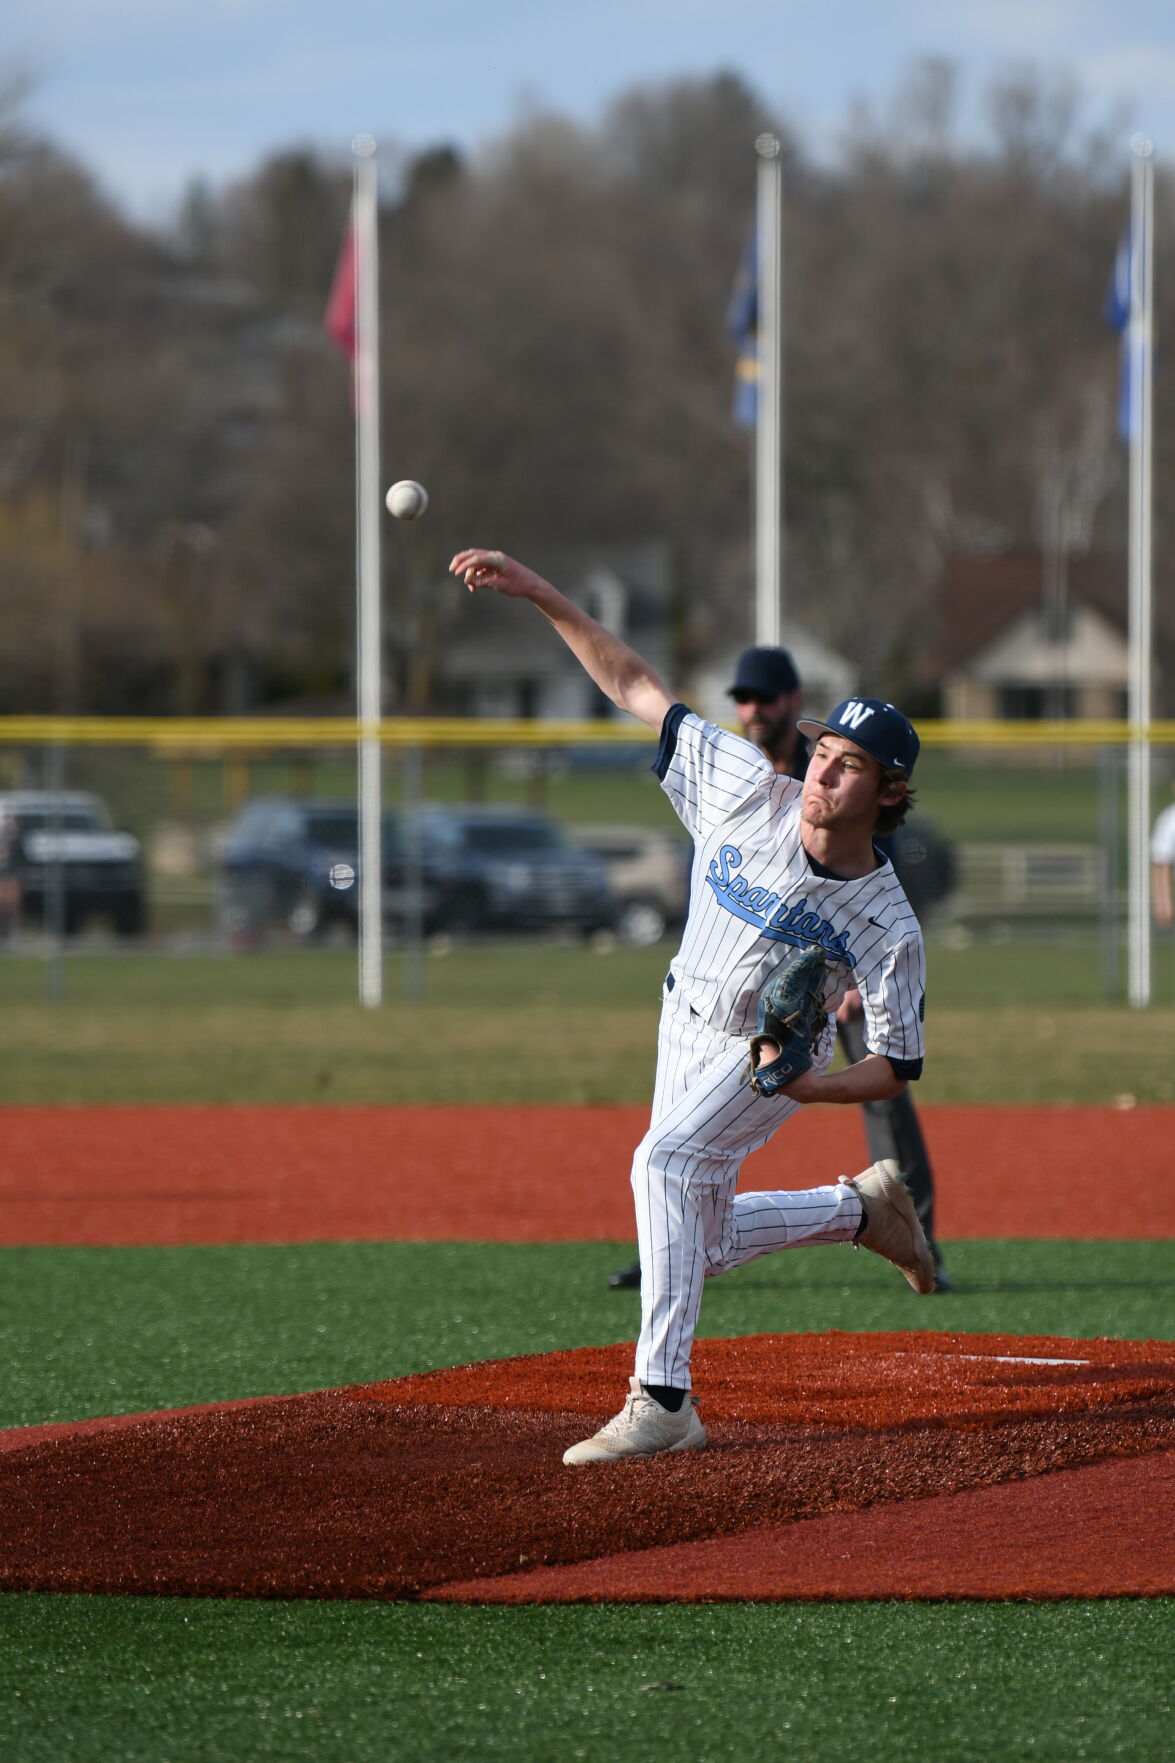 Homestead Wins Gritty Baseball Game Against West Bend West behind Apel’s Strong Pitching